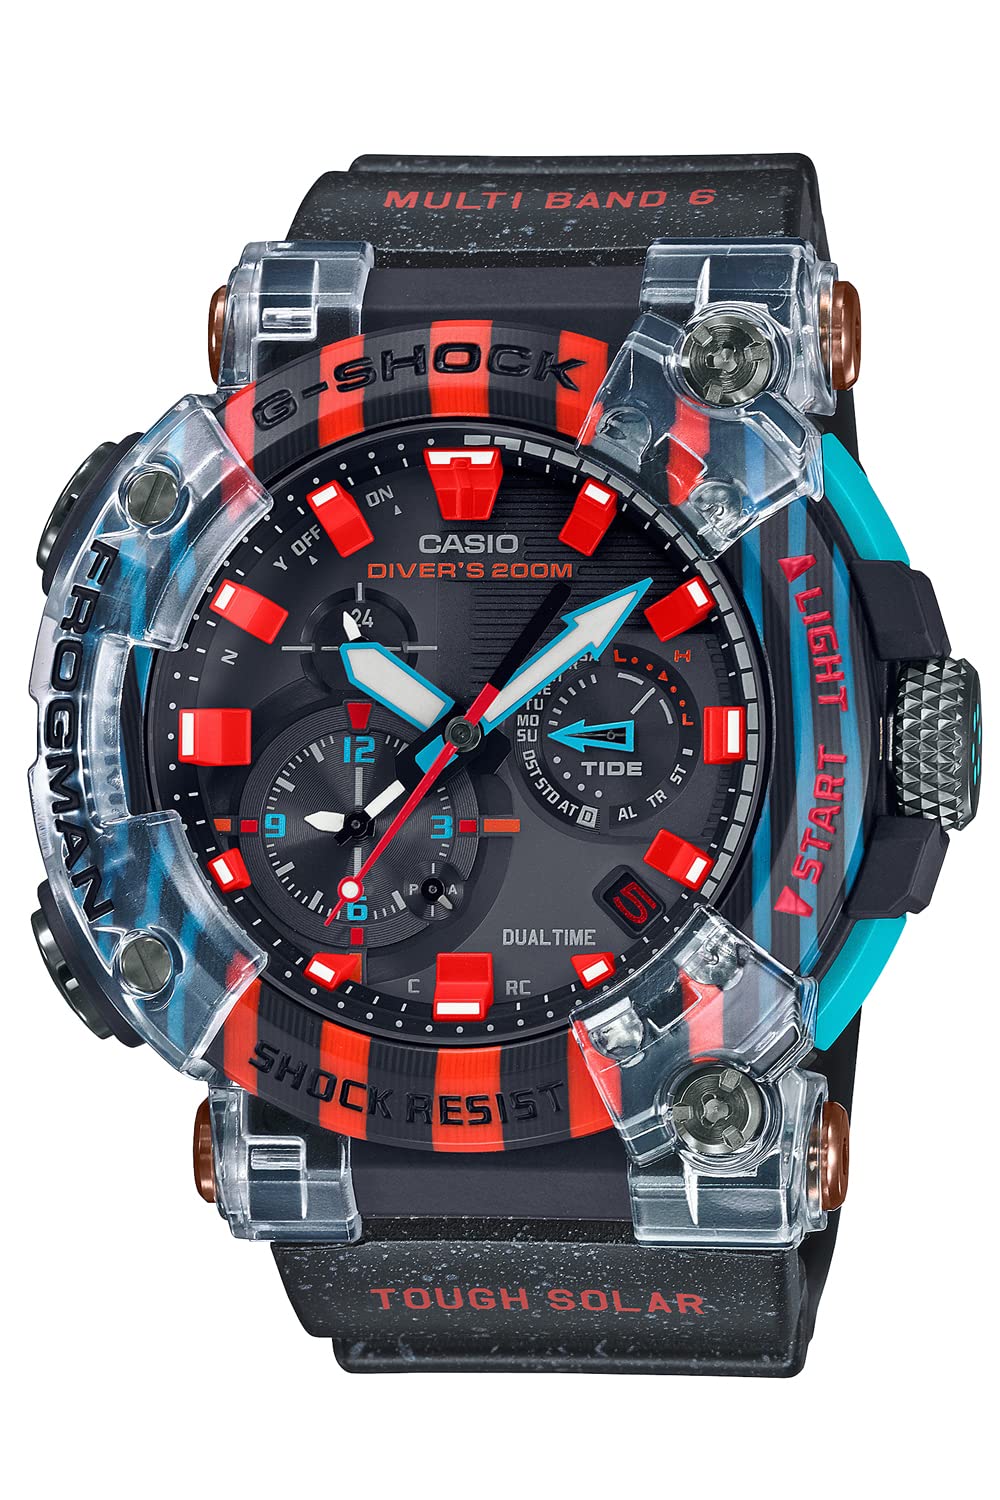 Casio mens watches G-Shock FROGMAN GWF-A1000APF-1AJR 30th Anniversary Limited Edition (Japan Domestic Genuine Products)